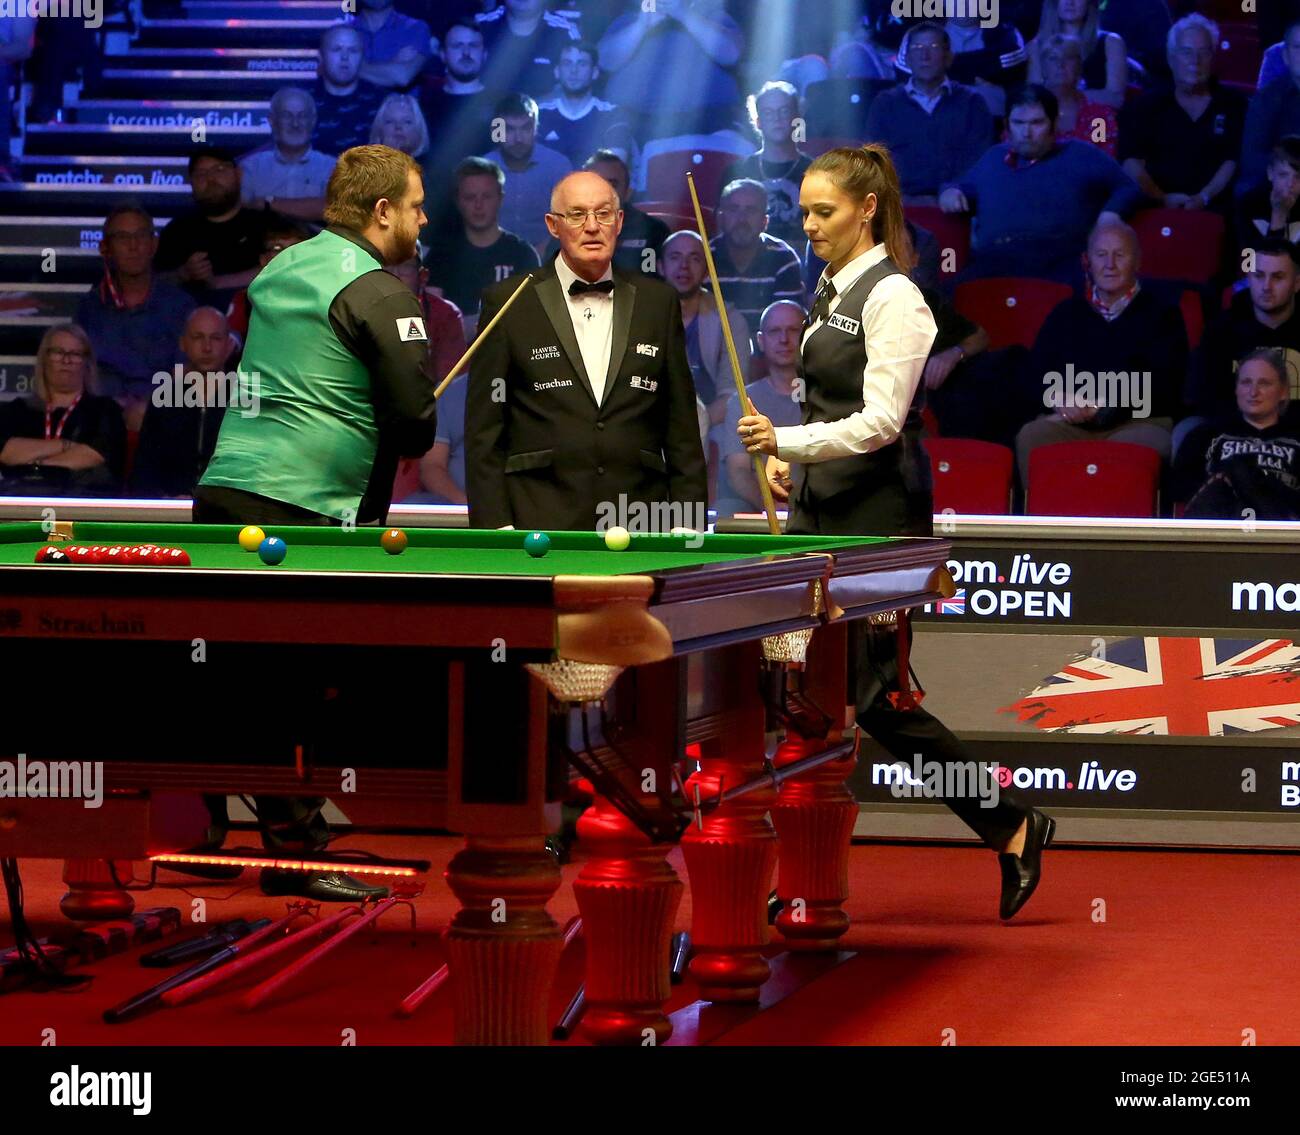 16th August 2021; Morningside Arena, Leicester, England; British Open Snooker Championship; Mark Allan and Reanne Evans start their match without shaking hands Stock Photo